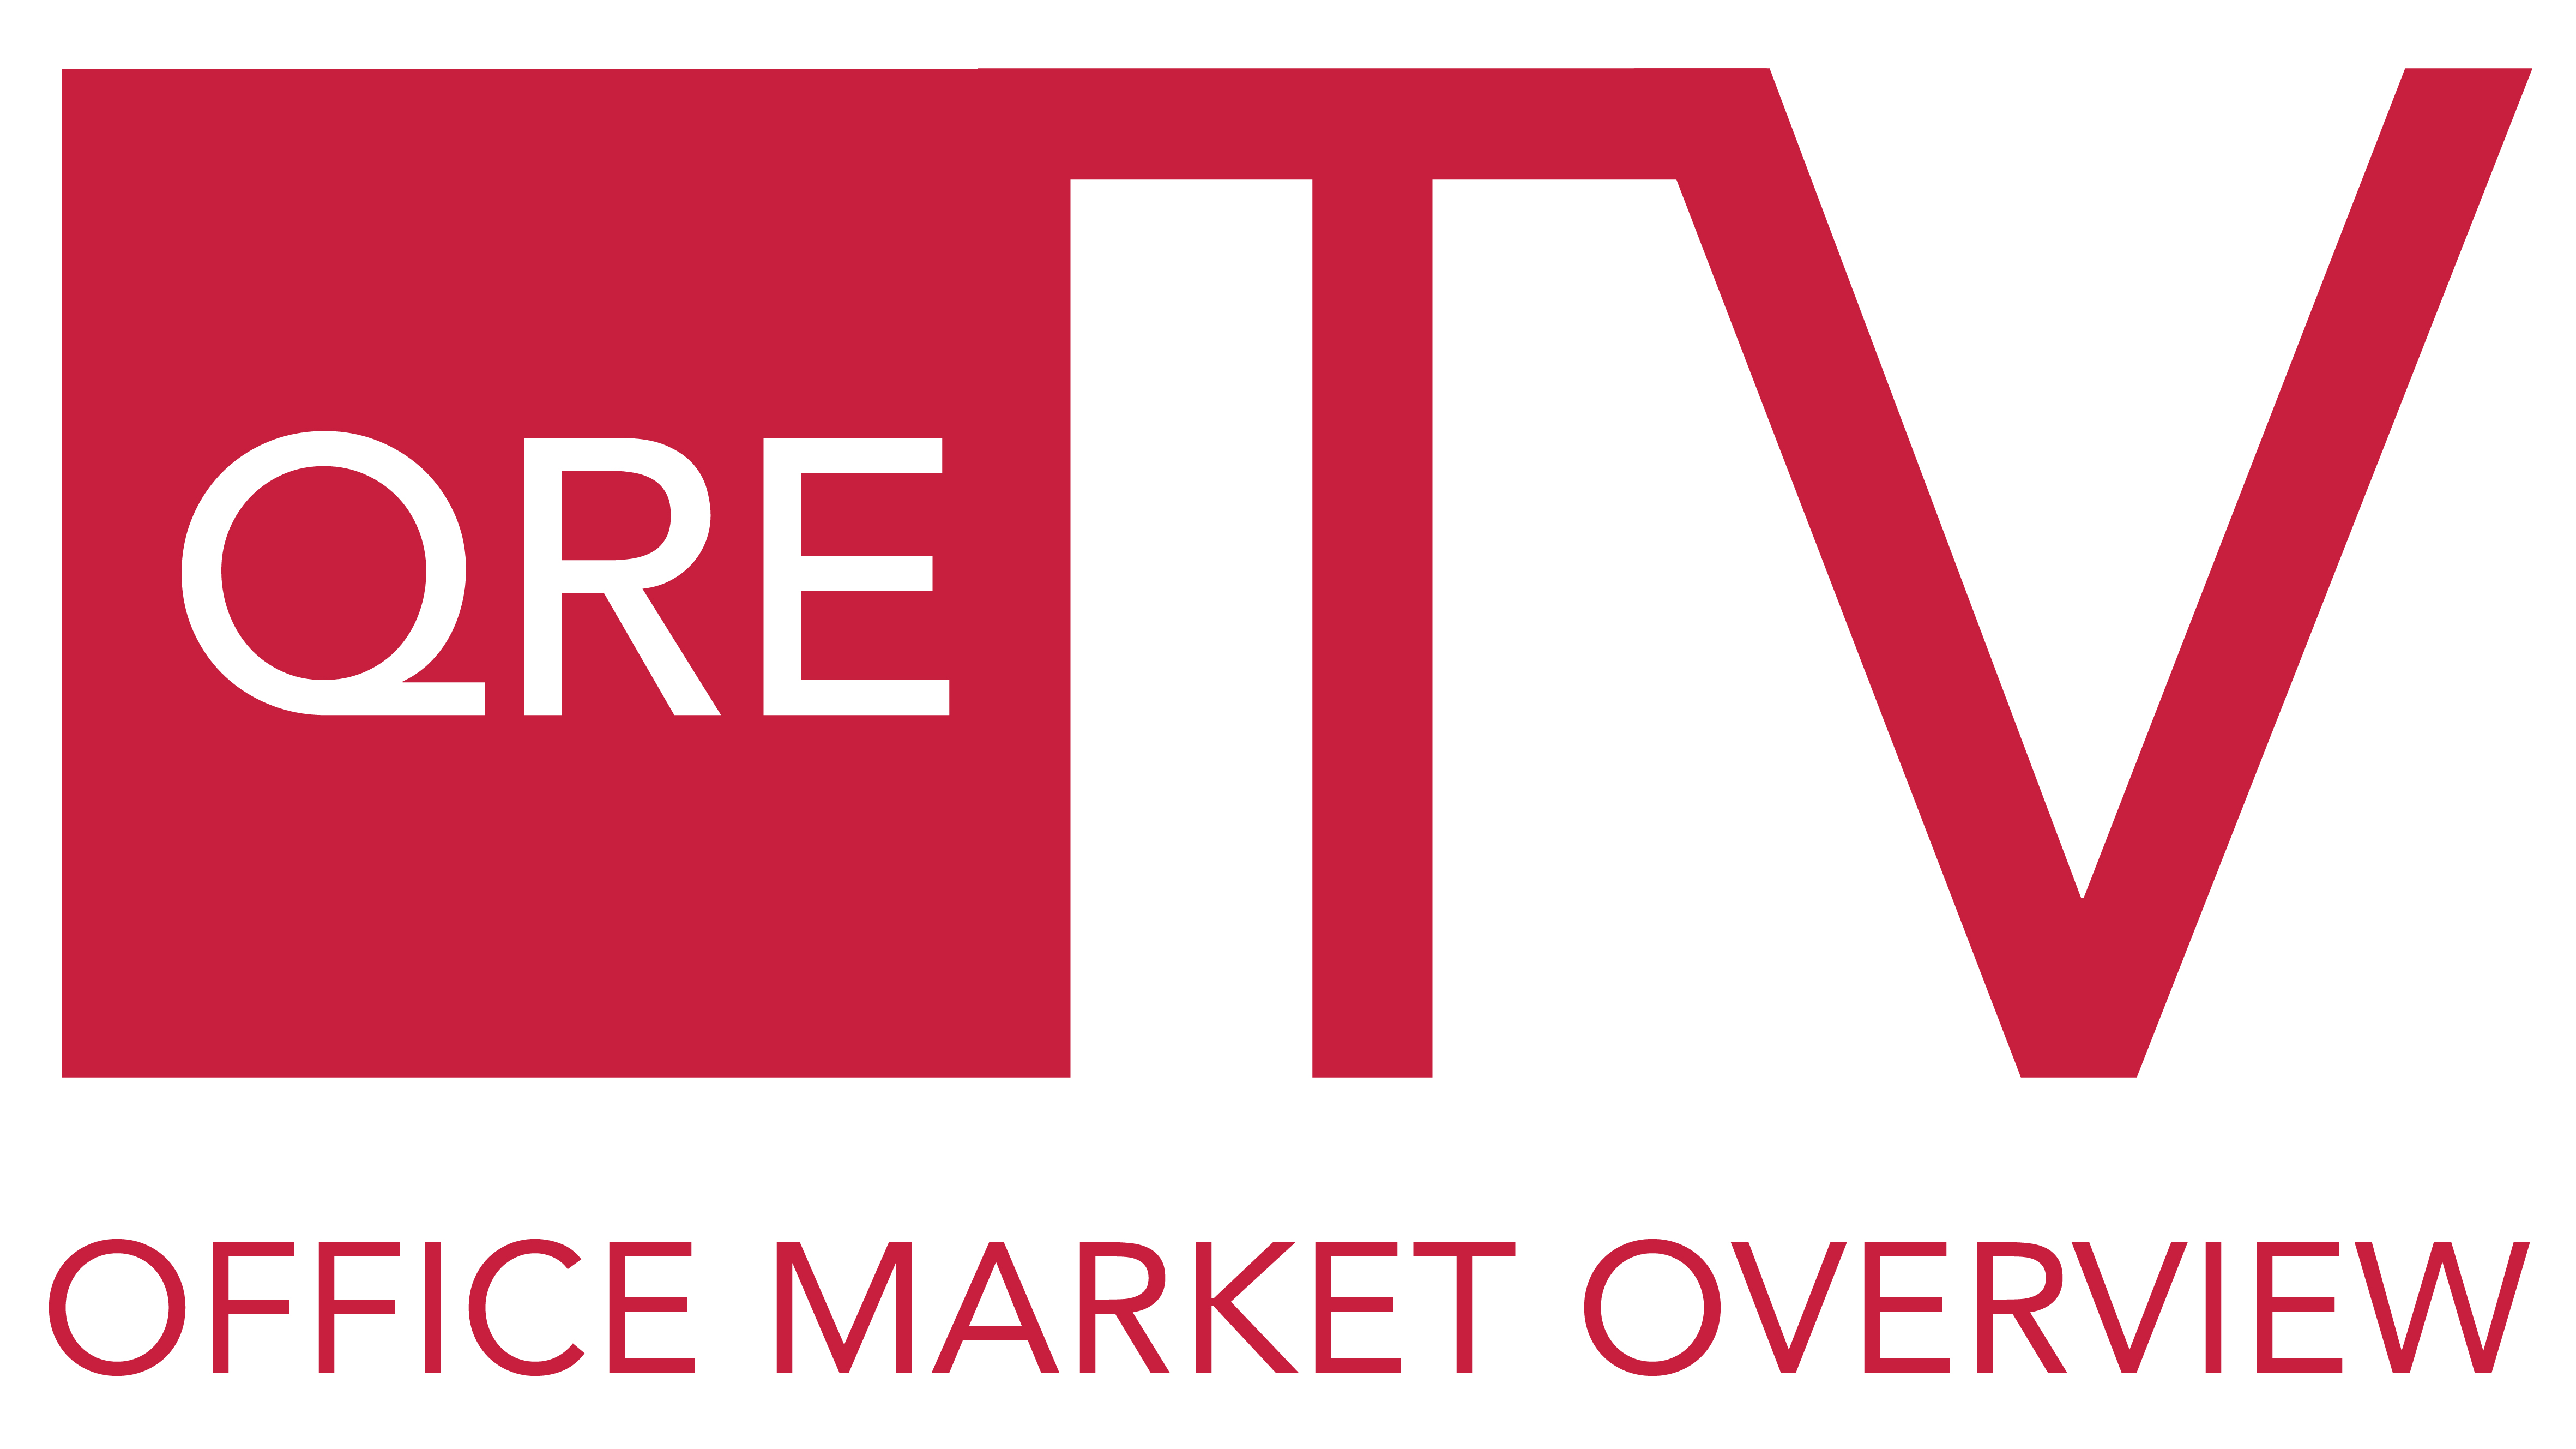 QRE TV - Office Market Overview